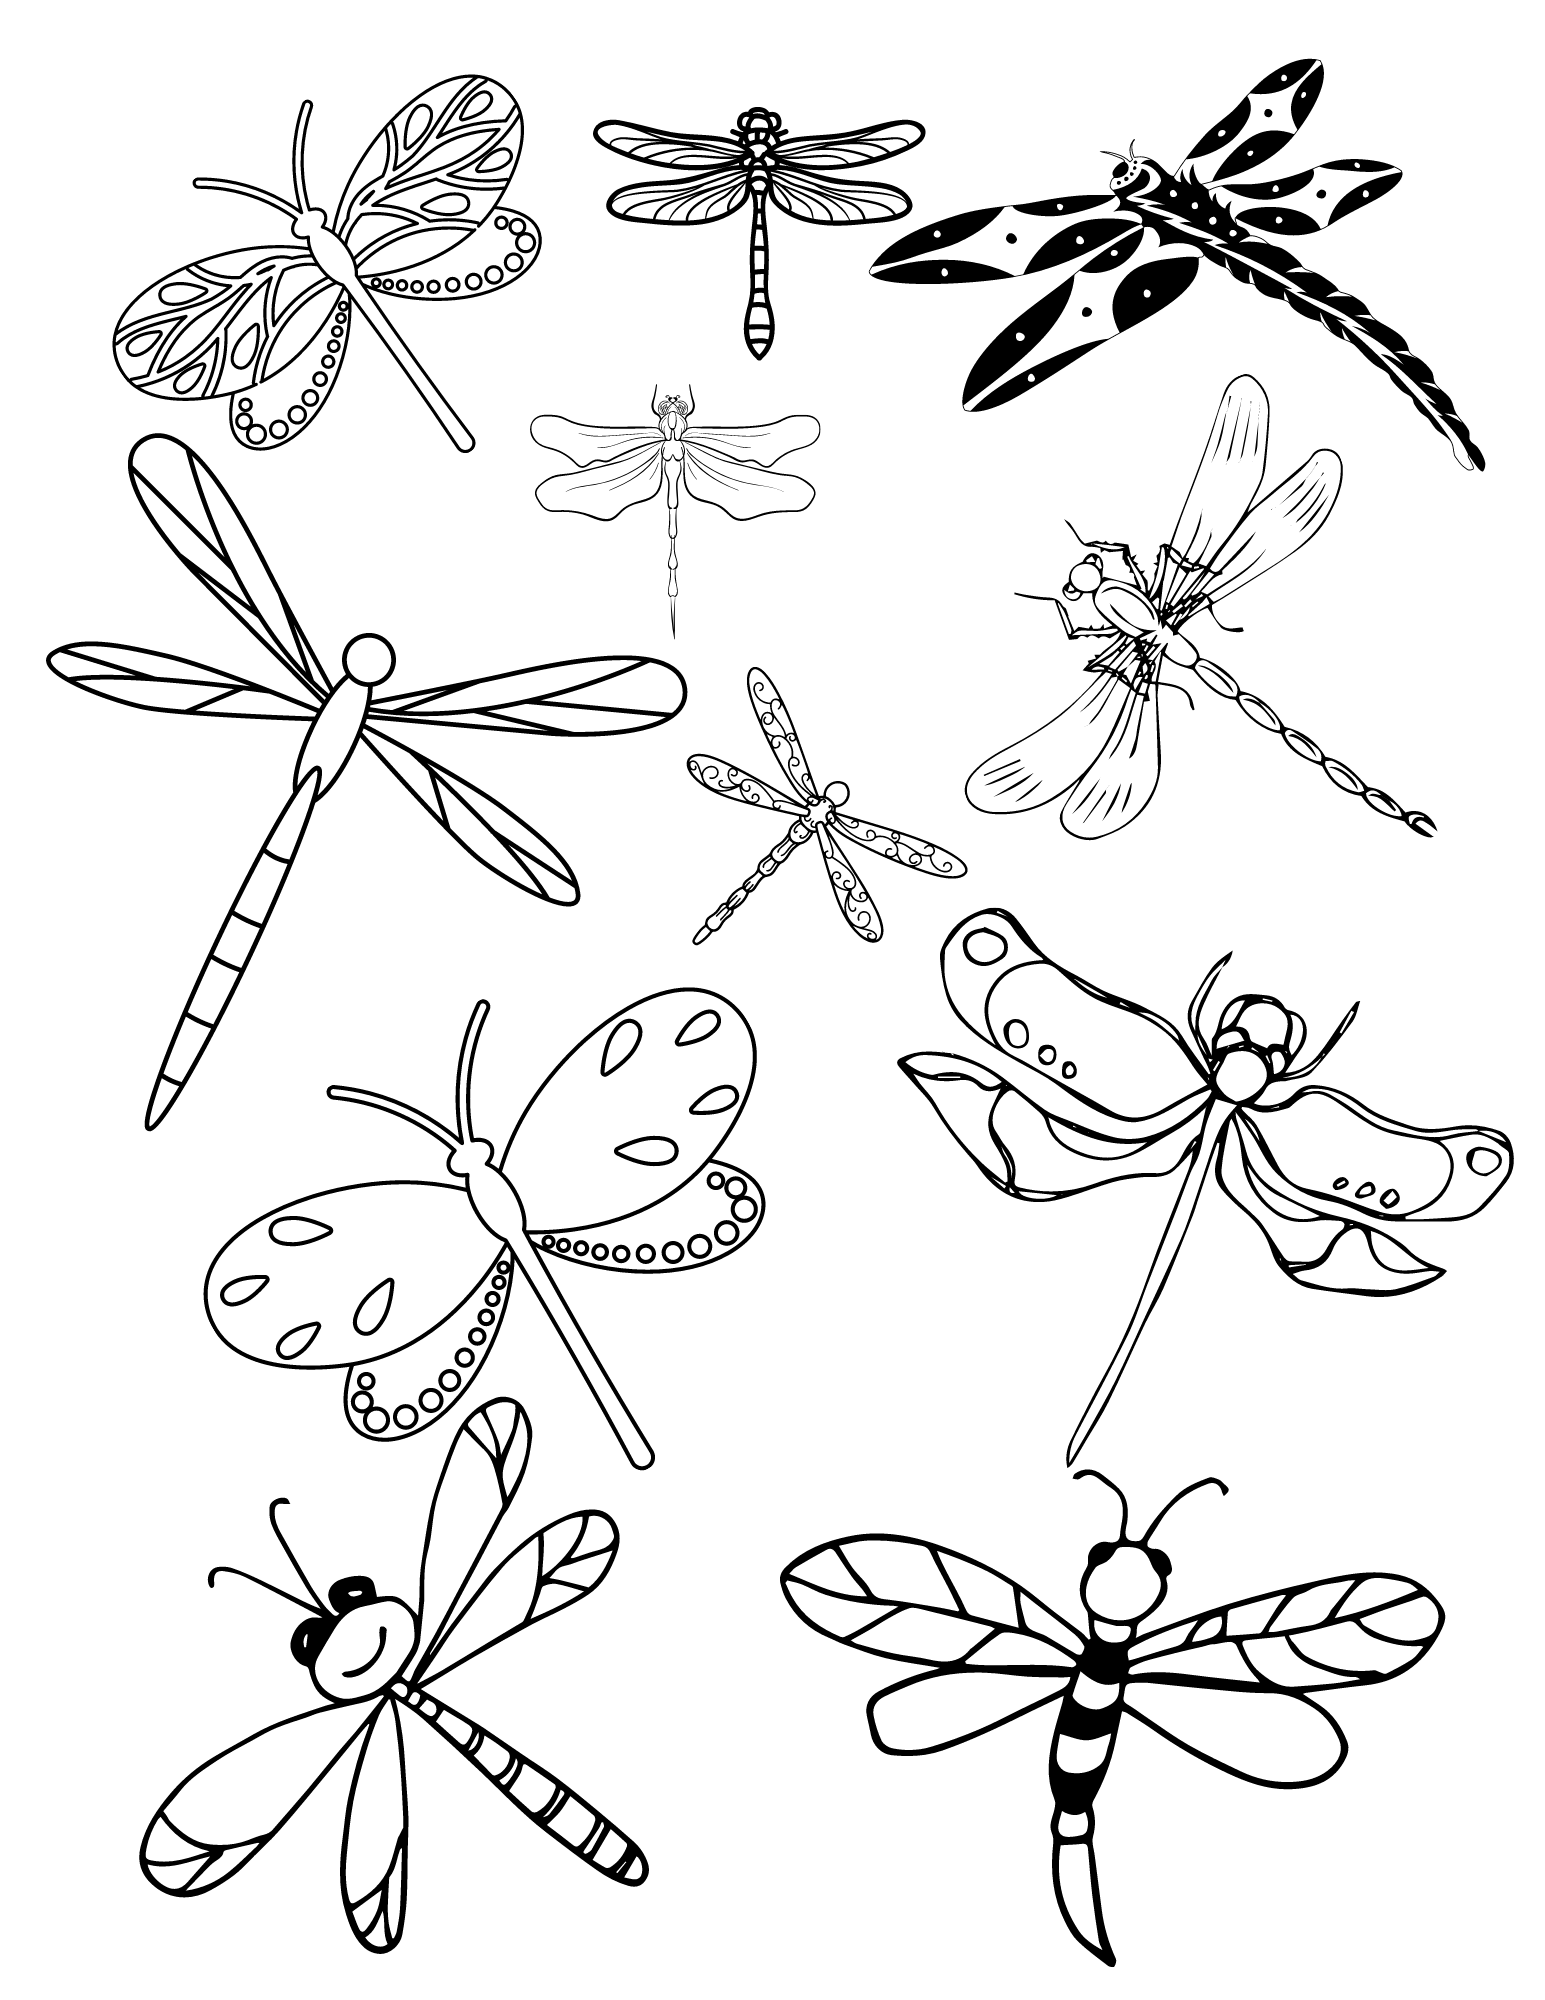 Dreamy dragonfly coloring pages for kids and adults